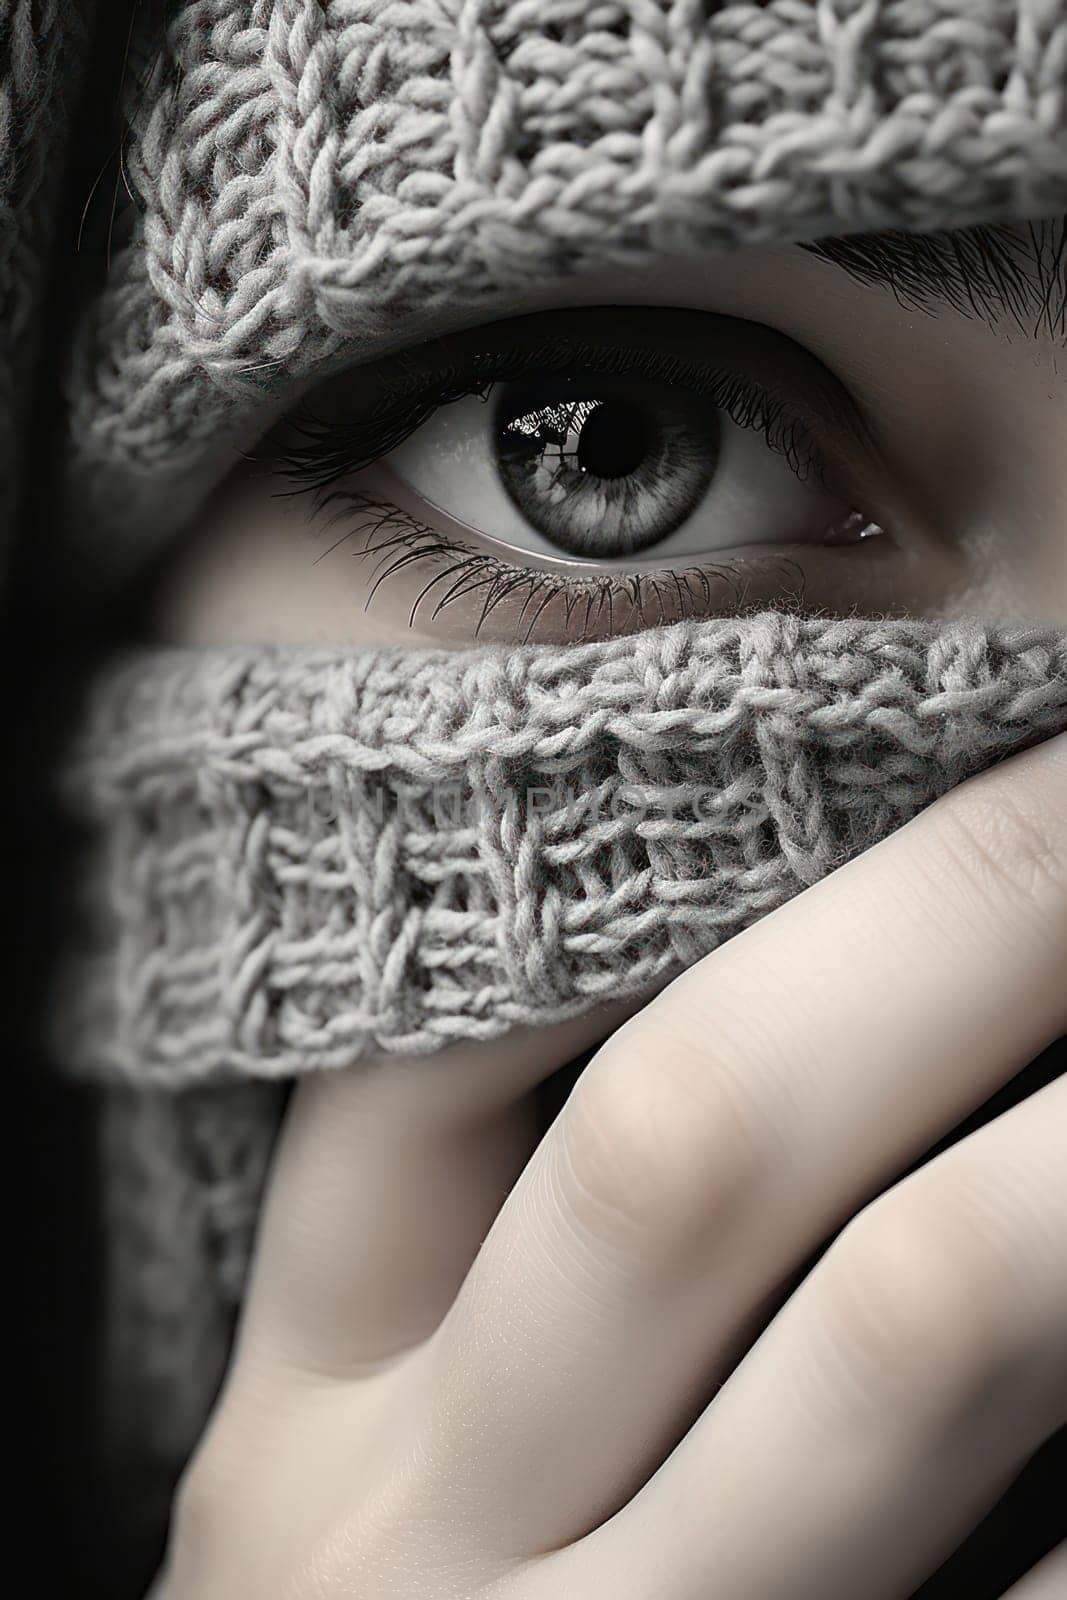 Female Beauty in White: Close-up Portrait of a Young Woman with a Black Scarf, Looking Through Knit Blue Veil in Handmade Ethnic Fashion.